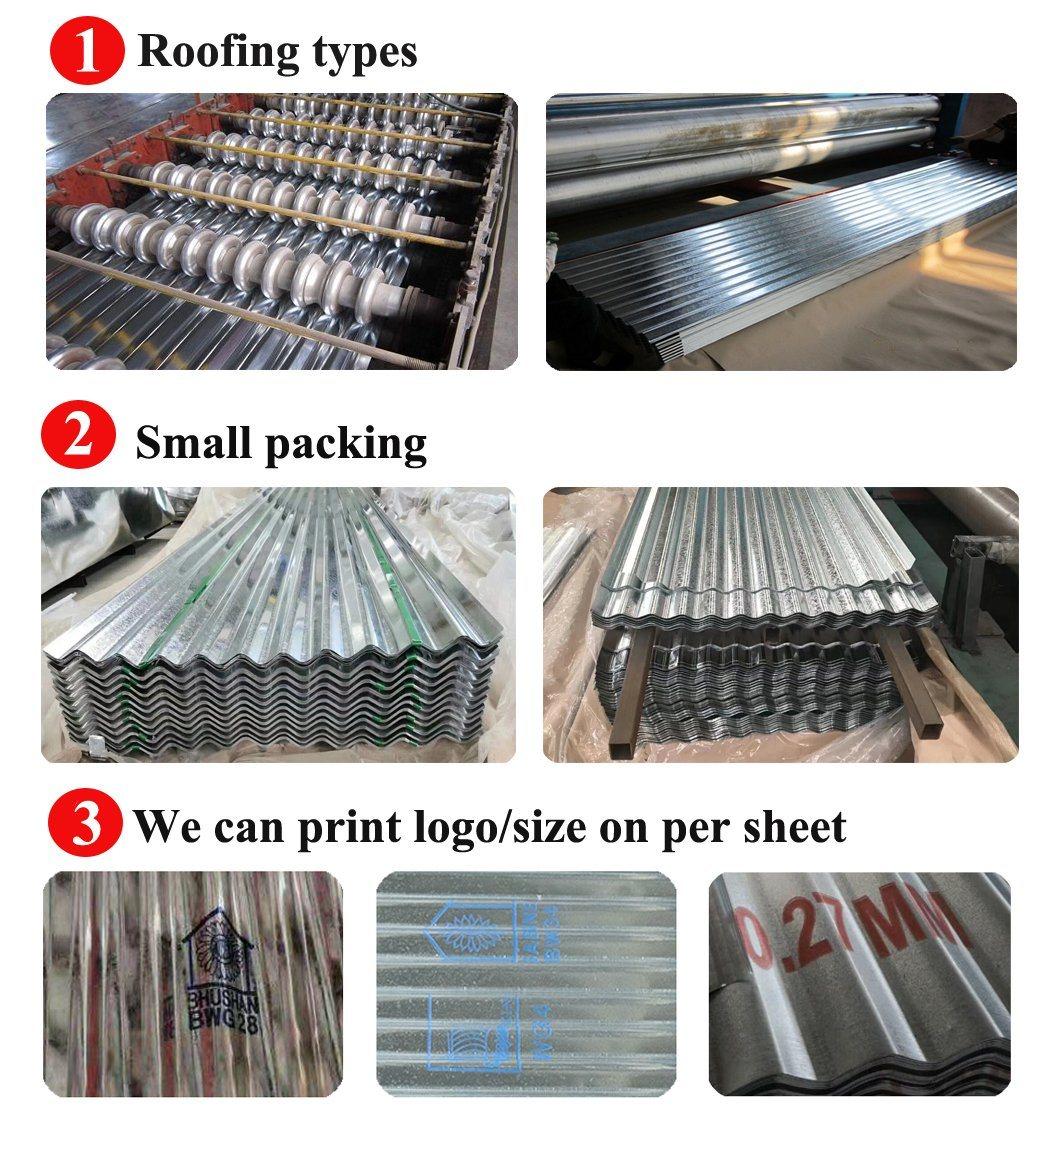 Cold Rolled Aluzinc Coated Galvalume Corrugated Steel Roofing Sheet